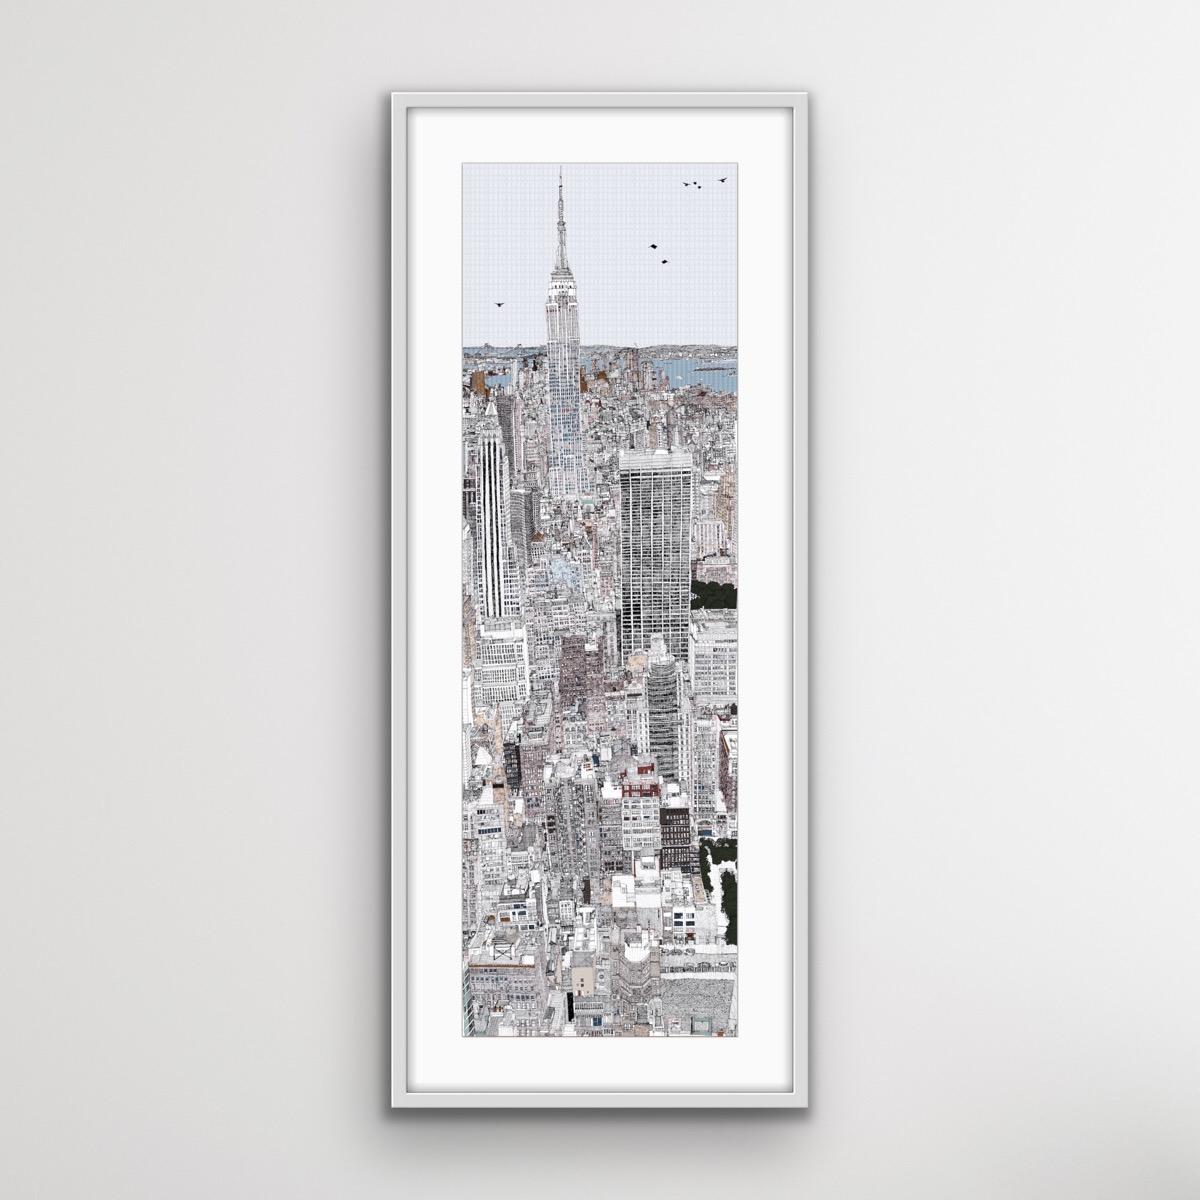 This print depicts the famous view from Manhattan’s Rockefeller Centre, including the Empire State Building nestled amongst the New York skyline.
Clare Halifax, is available online and in our gallery with Wychwood Art. Clare Halifax is offering